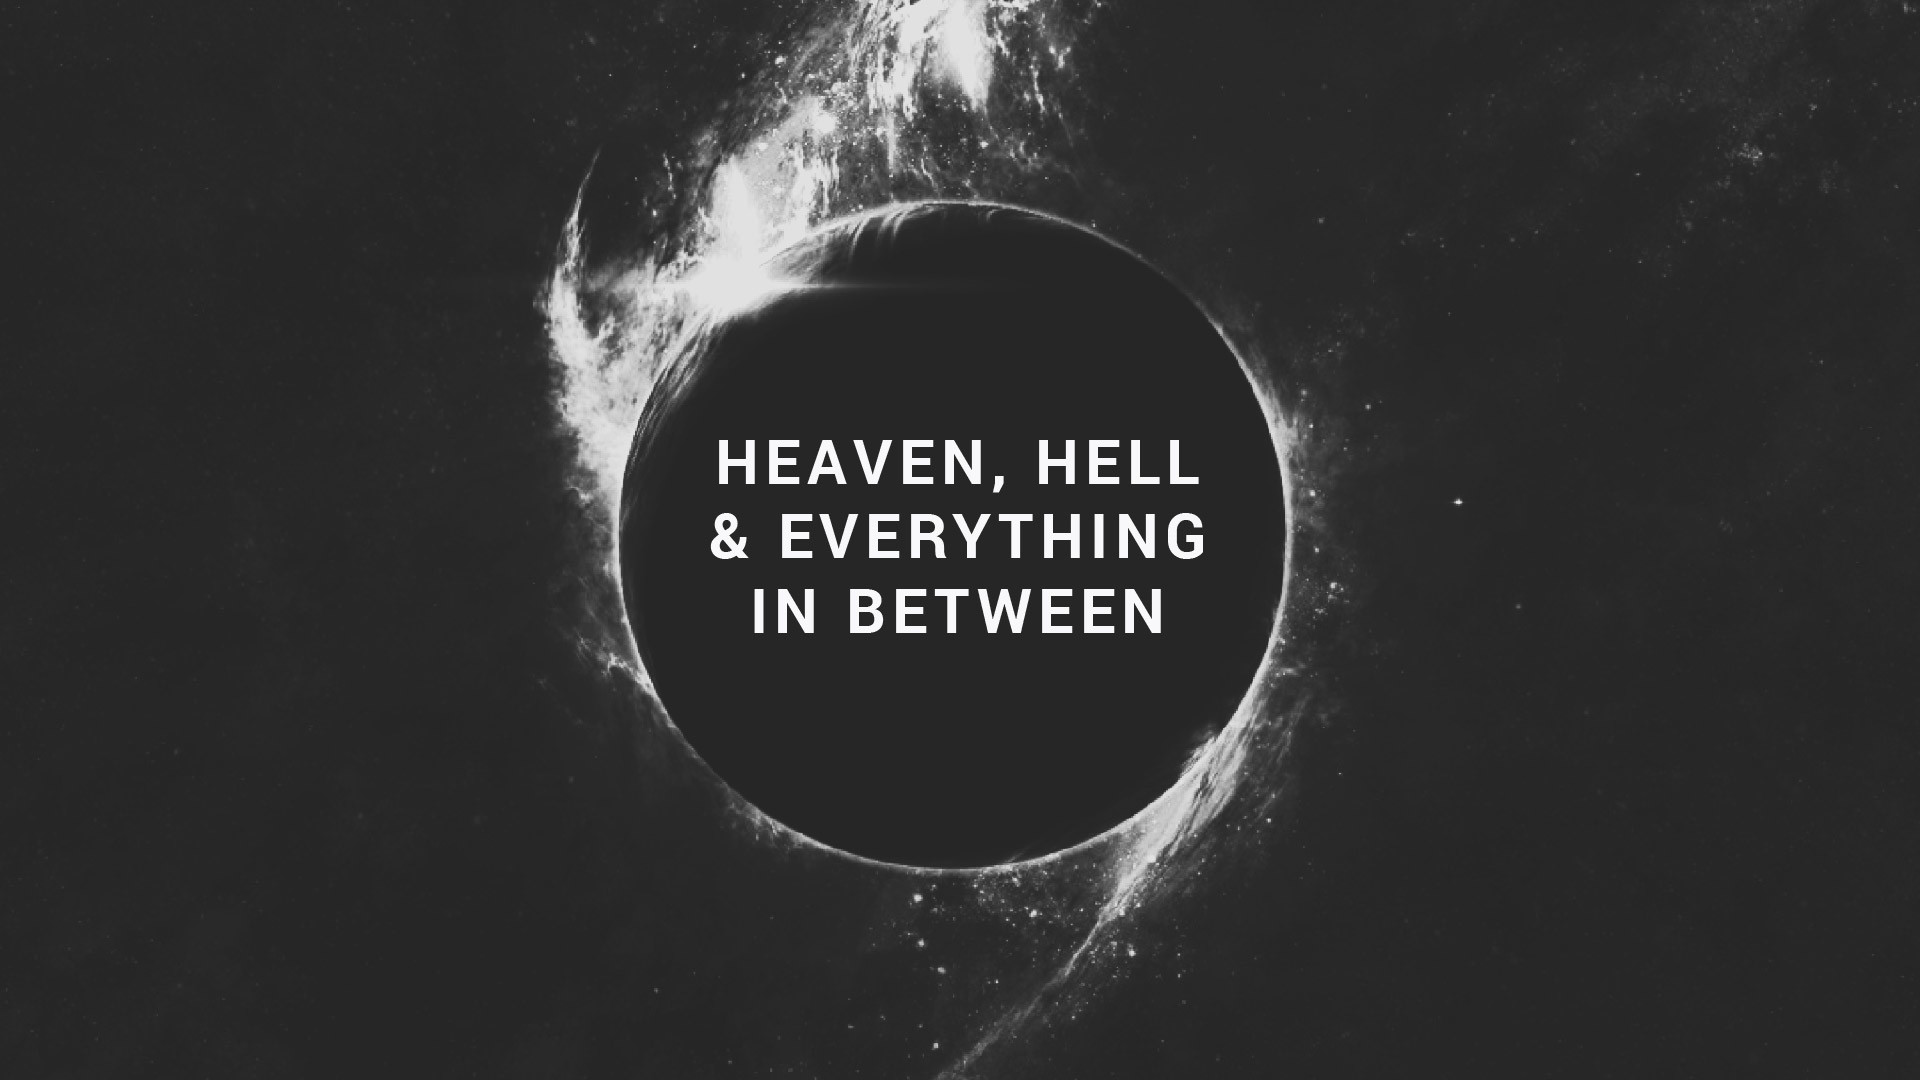 1920x1080 We Are CA Church Heaven, Hell & Everything in Between - We Are CA Church